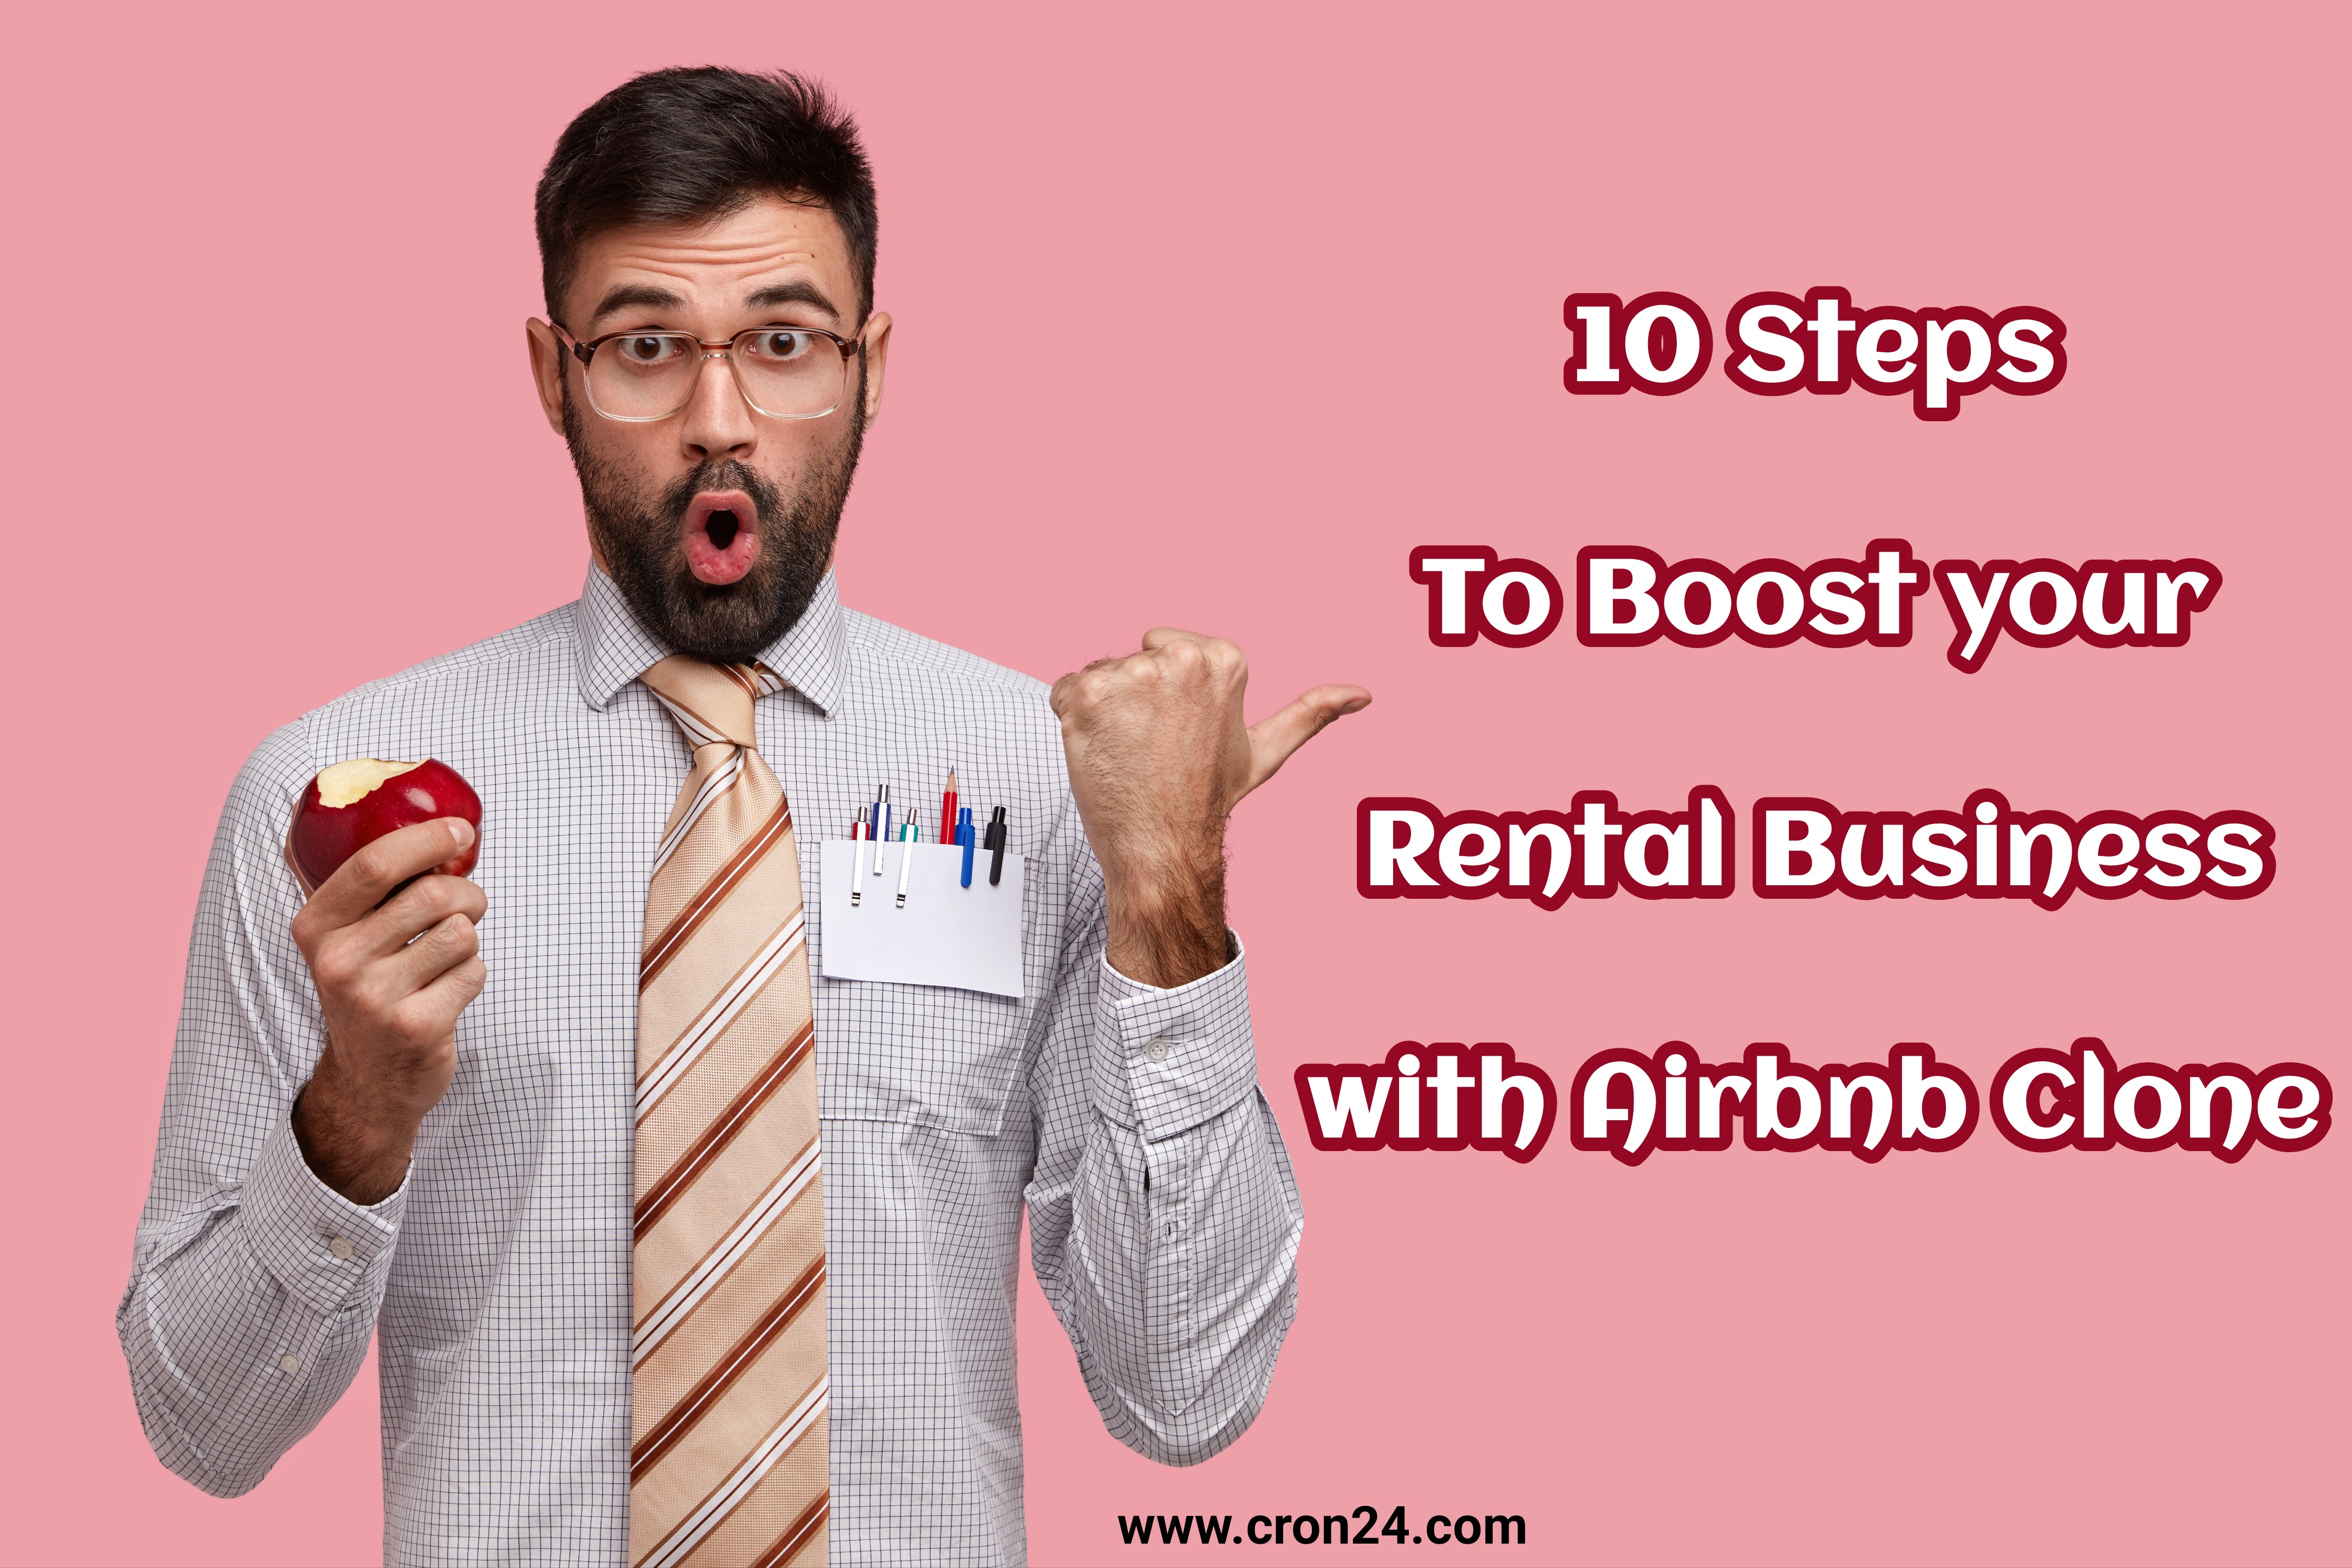 10 Steps To Boost Your Rental Business With Airbnb Clone